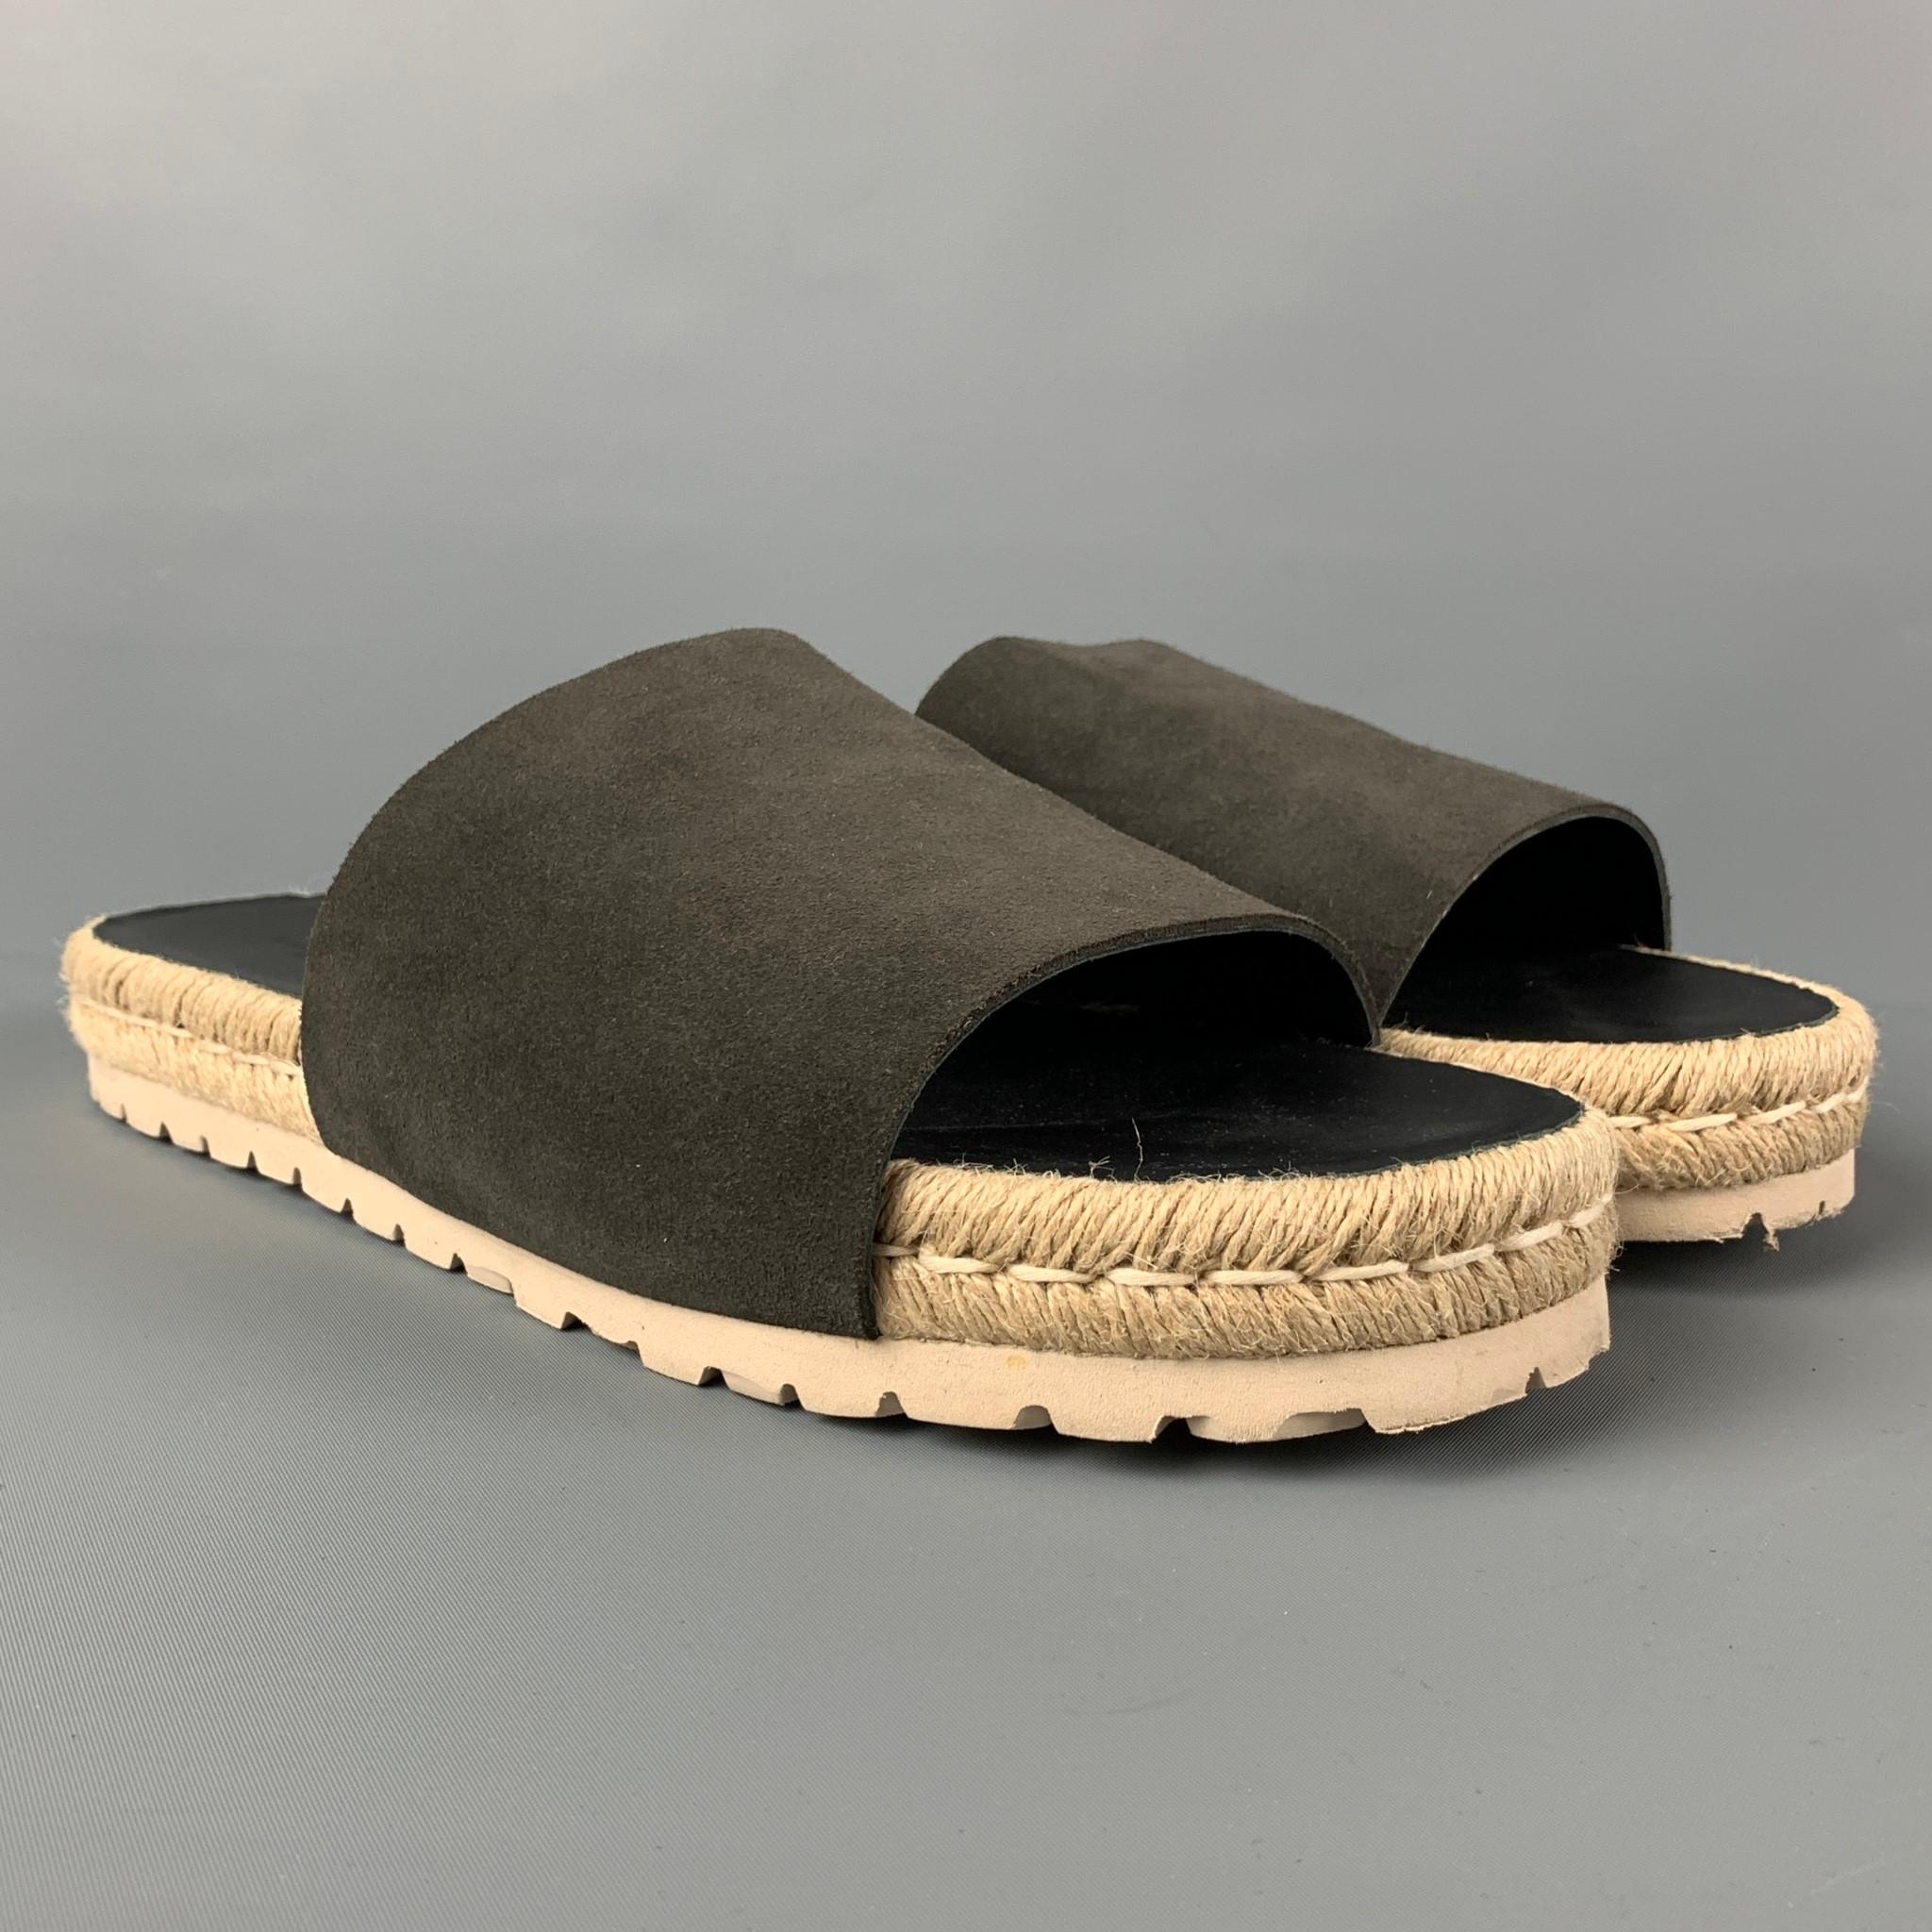 BALENCIAGA sandals comes in a grey & black leather featuring a natural rope espadrille trim and a slip on style. Made in Spain. 

New With Box. 
Marked: 45
Original Retail Price: $430.00

Outsole: 12 in. x 4 in. 